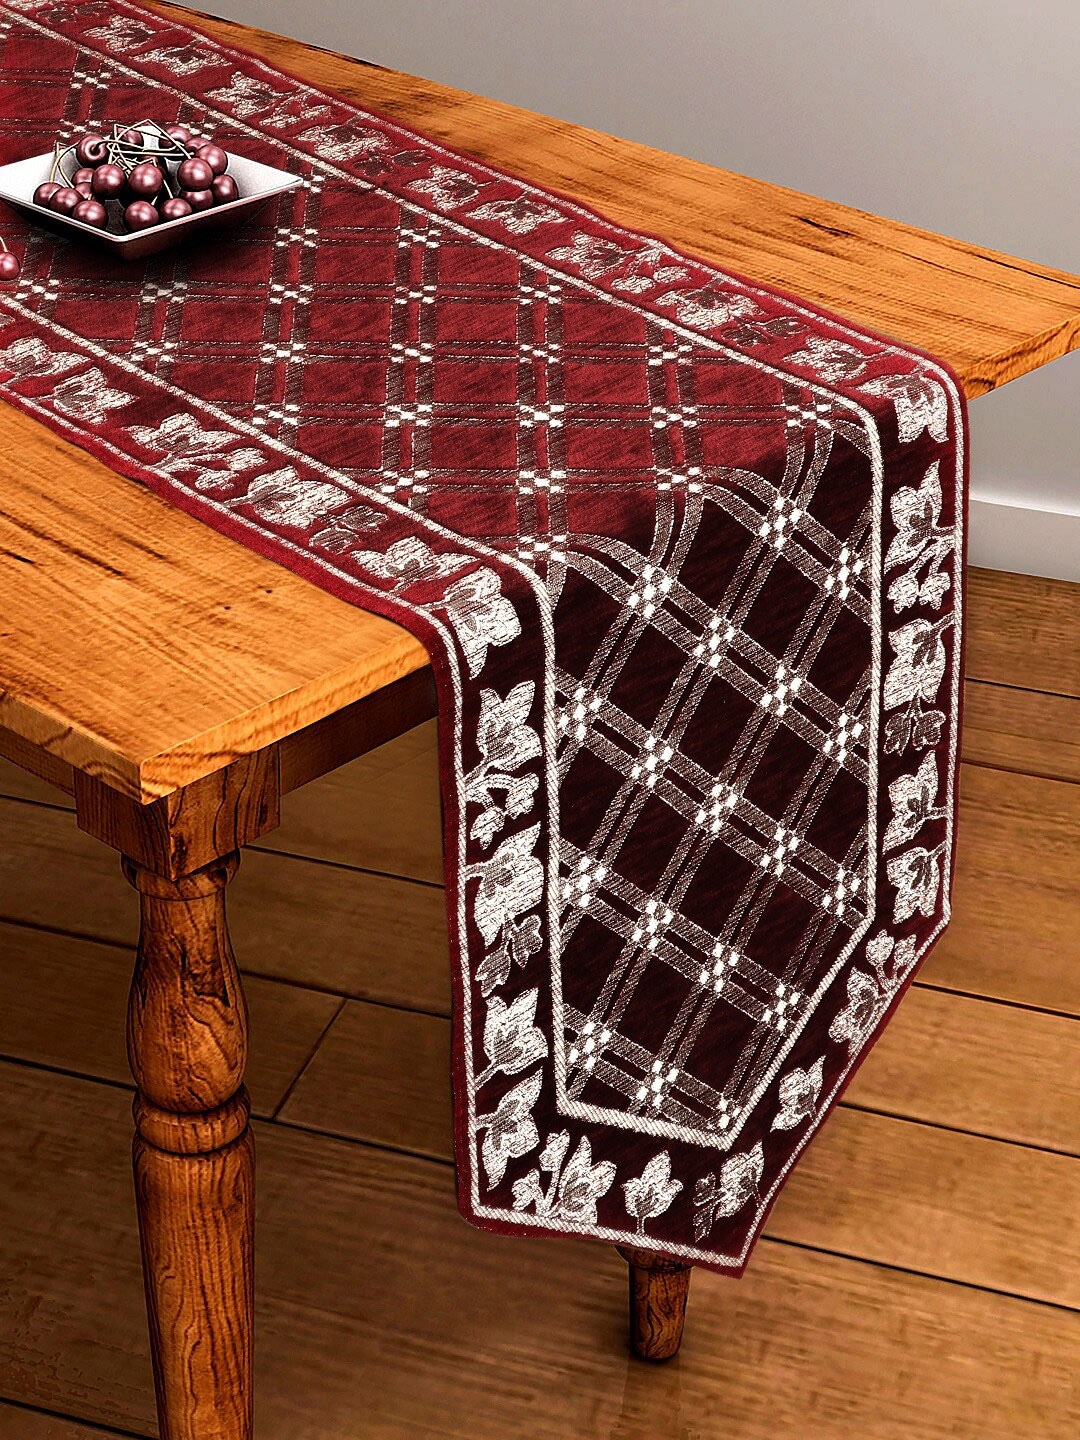 BELLA TRUE Brown & White Embroidered Chennile Table Runner Price in India